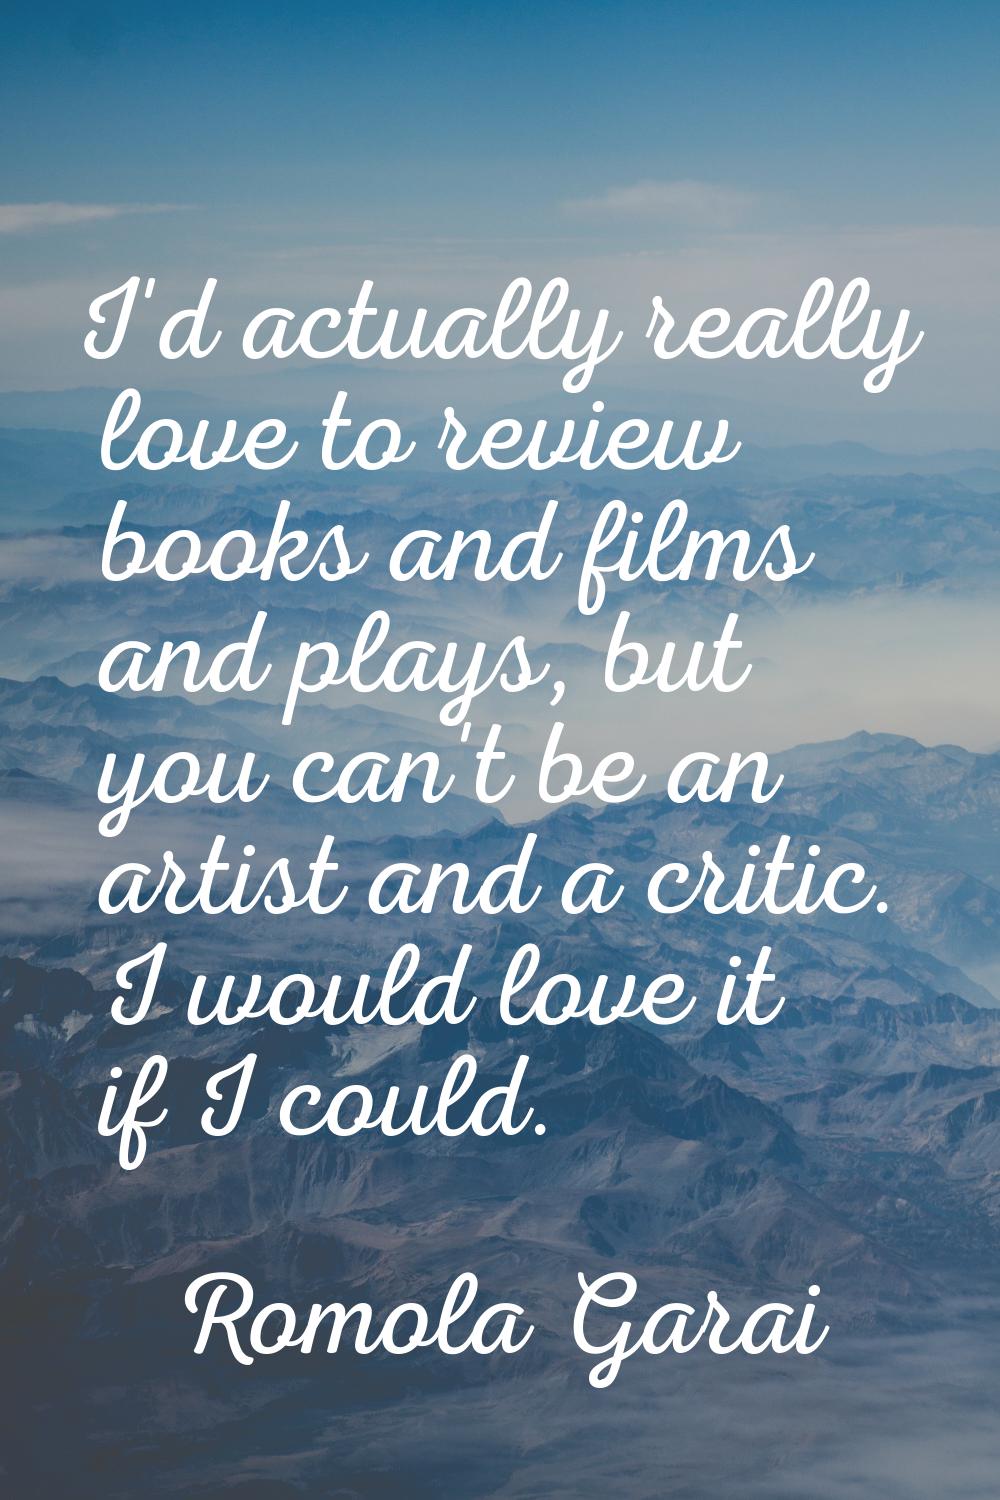 I'd actually really love to review books and films and plays, but you can't be an artist and a crit